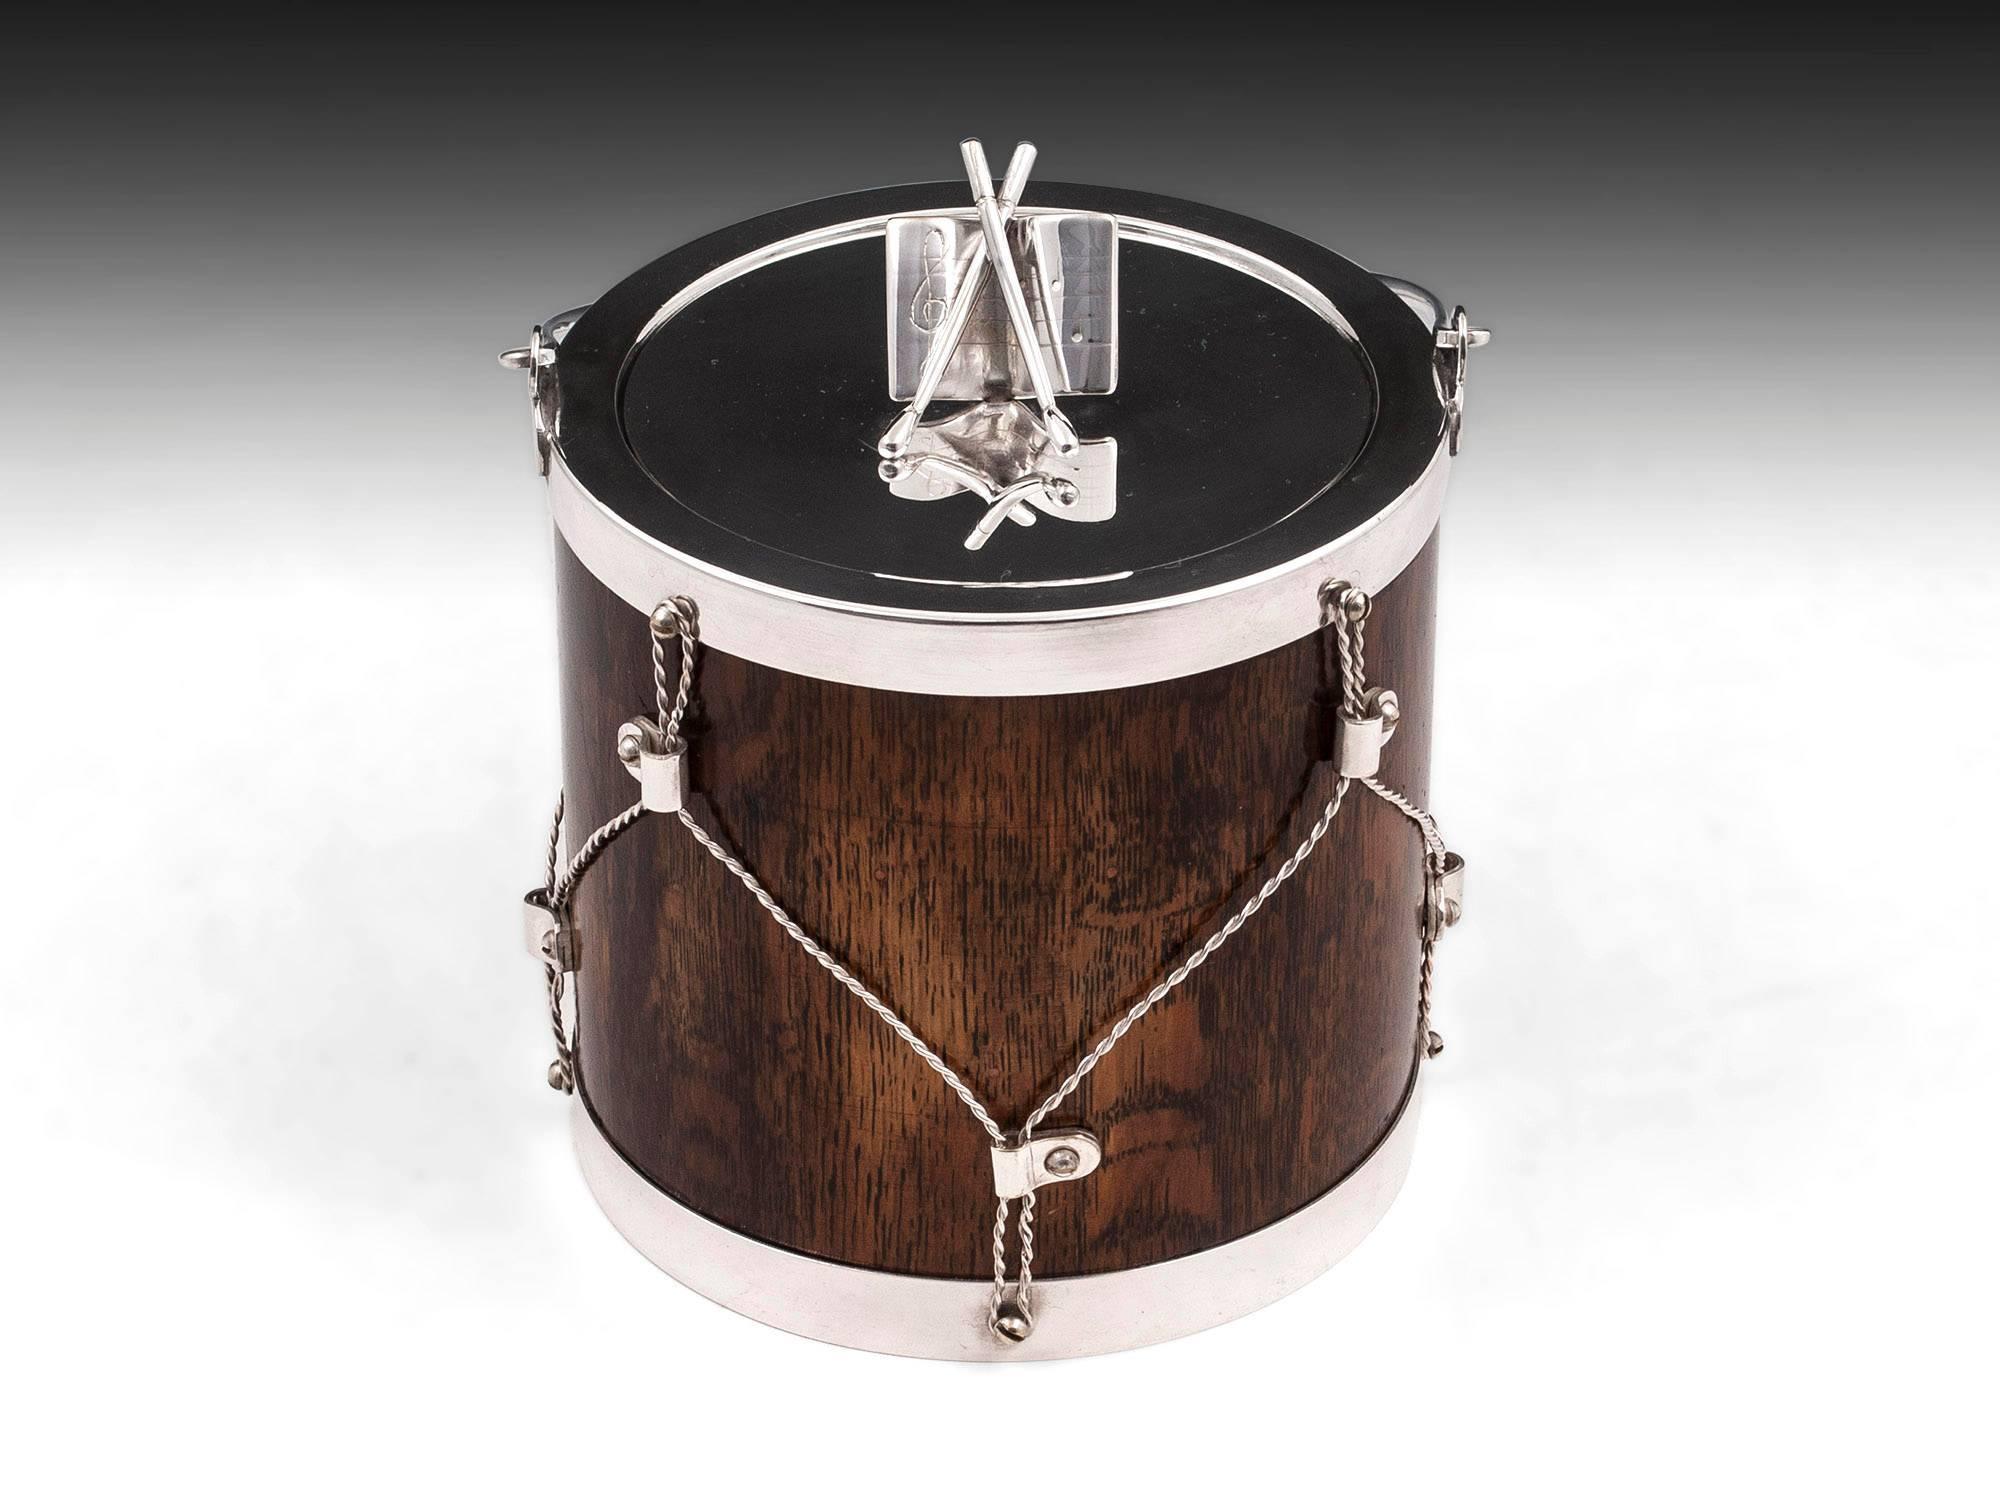 Novelty Victorian biscuit barrel in the form of a drum, made from oak and featuring silver plated details, including the removable lid which is adorned with sheet music and drumsticks. 

The interior of the military drum biscuit barrel features